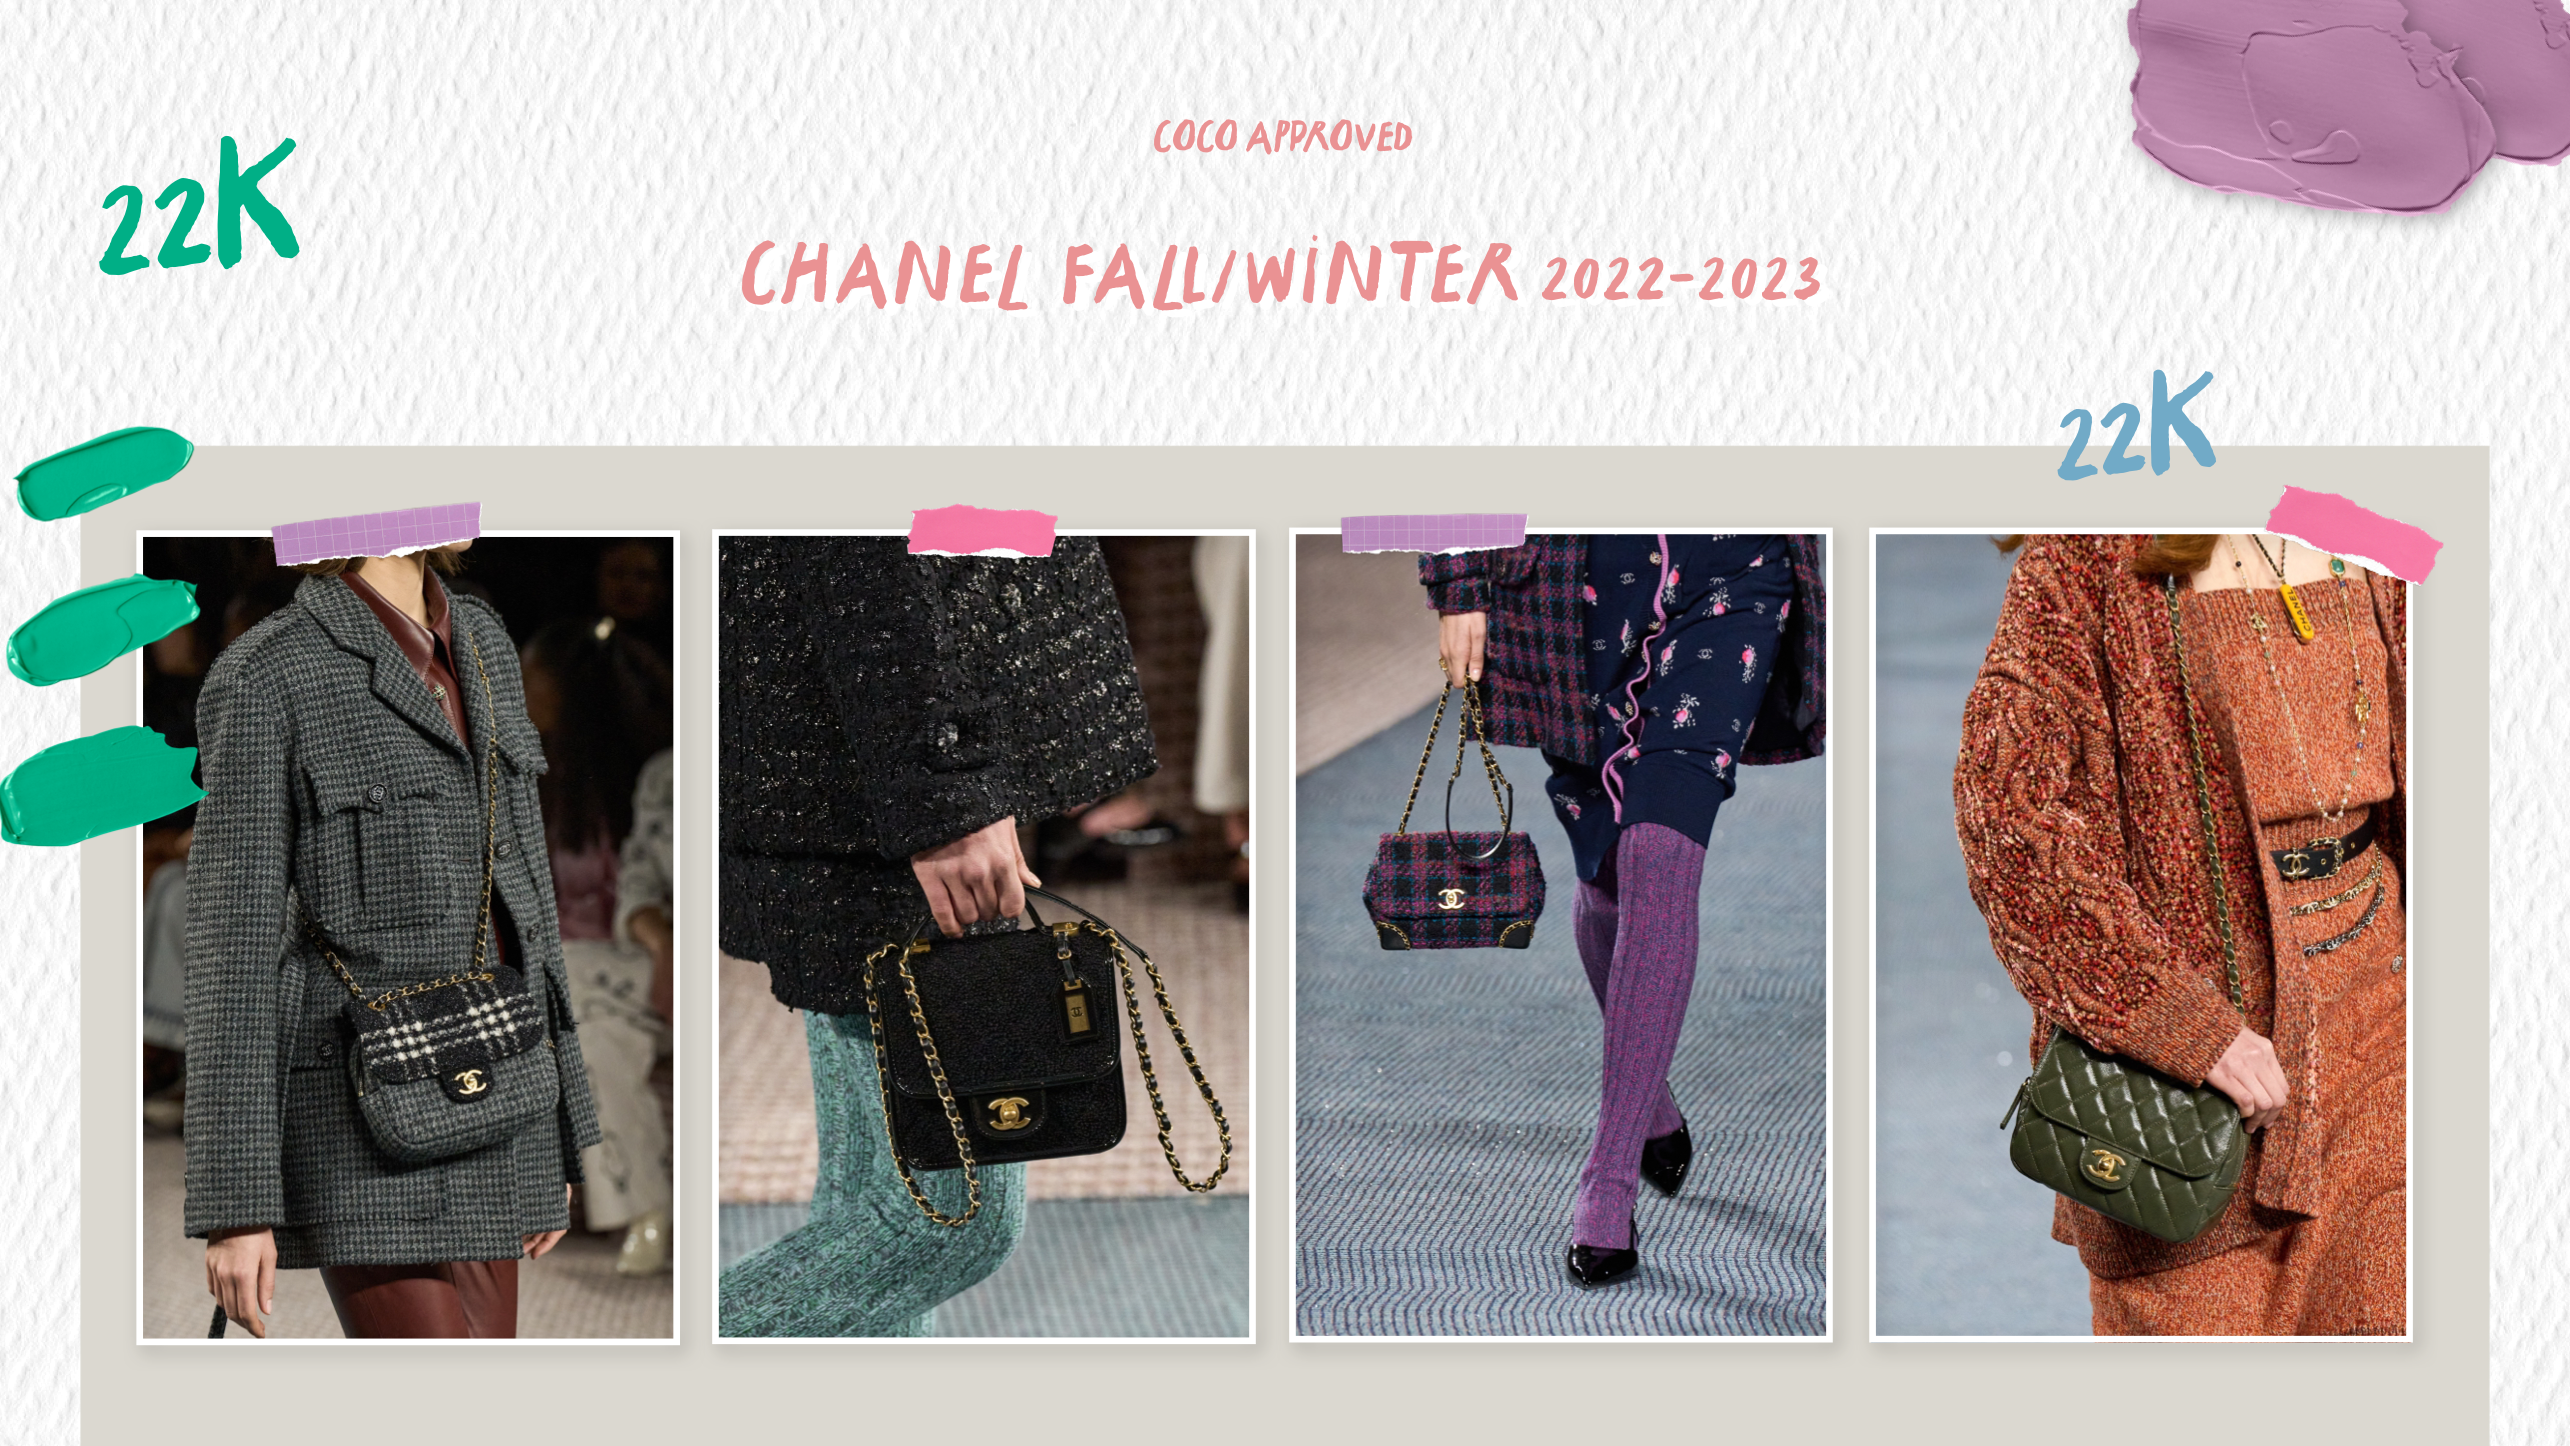 Preview.ph - Love #Chanel? Comment with your picks below